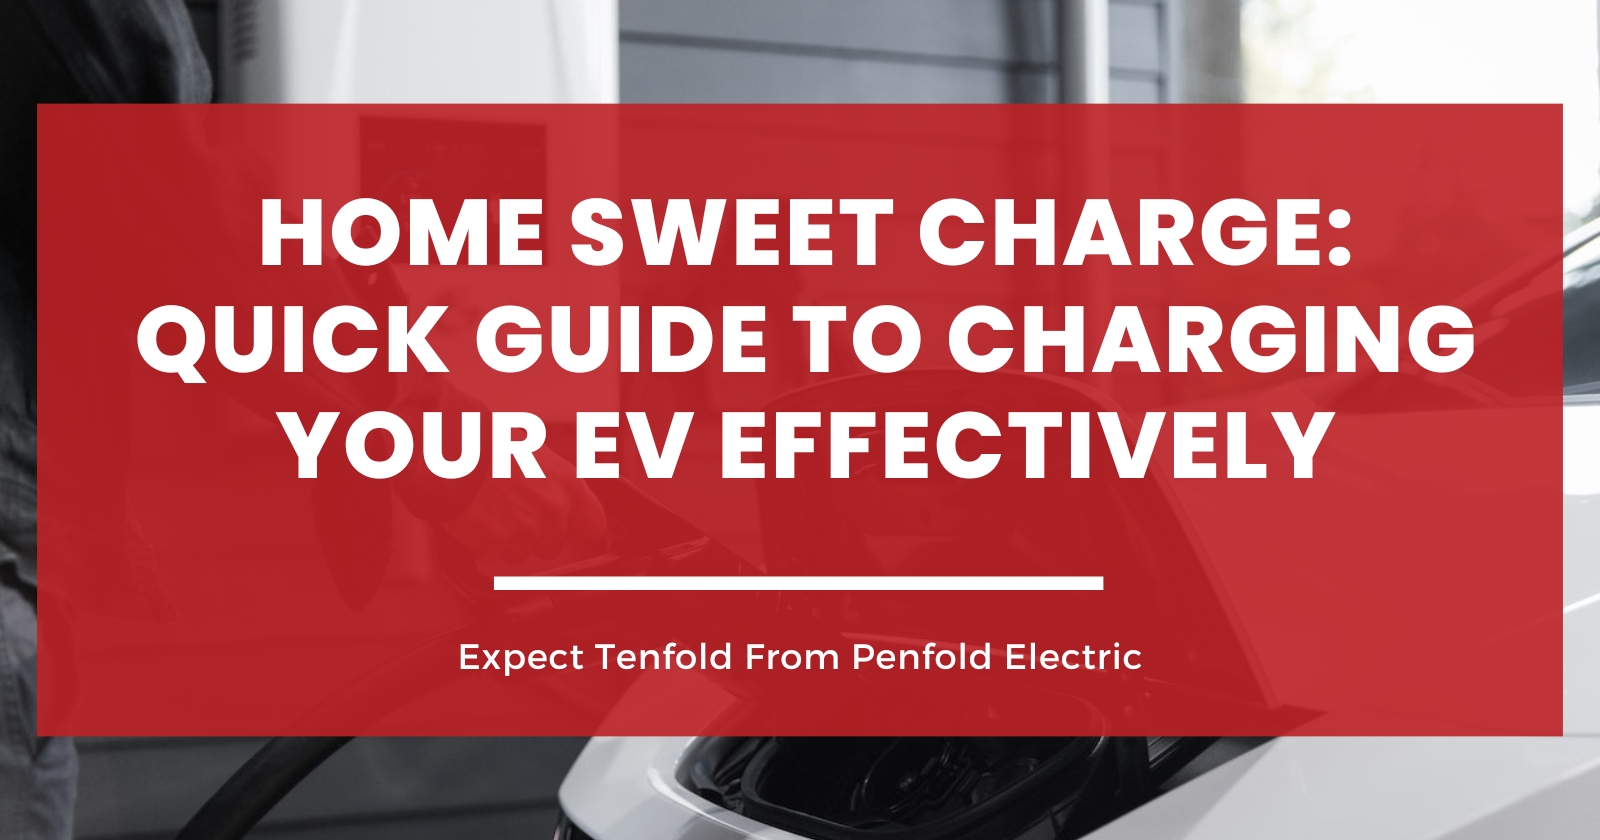 Home Sweet Charge: Quick Guide to Charging Your EV Effectively